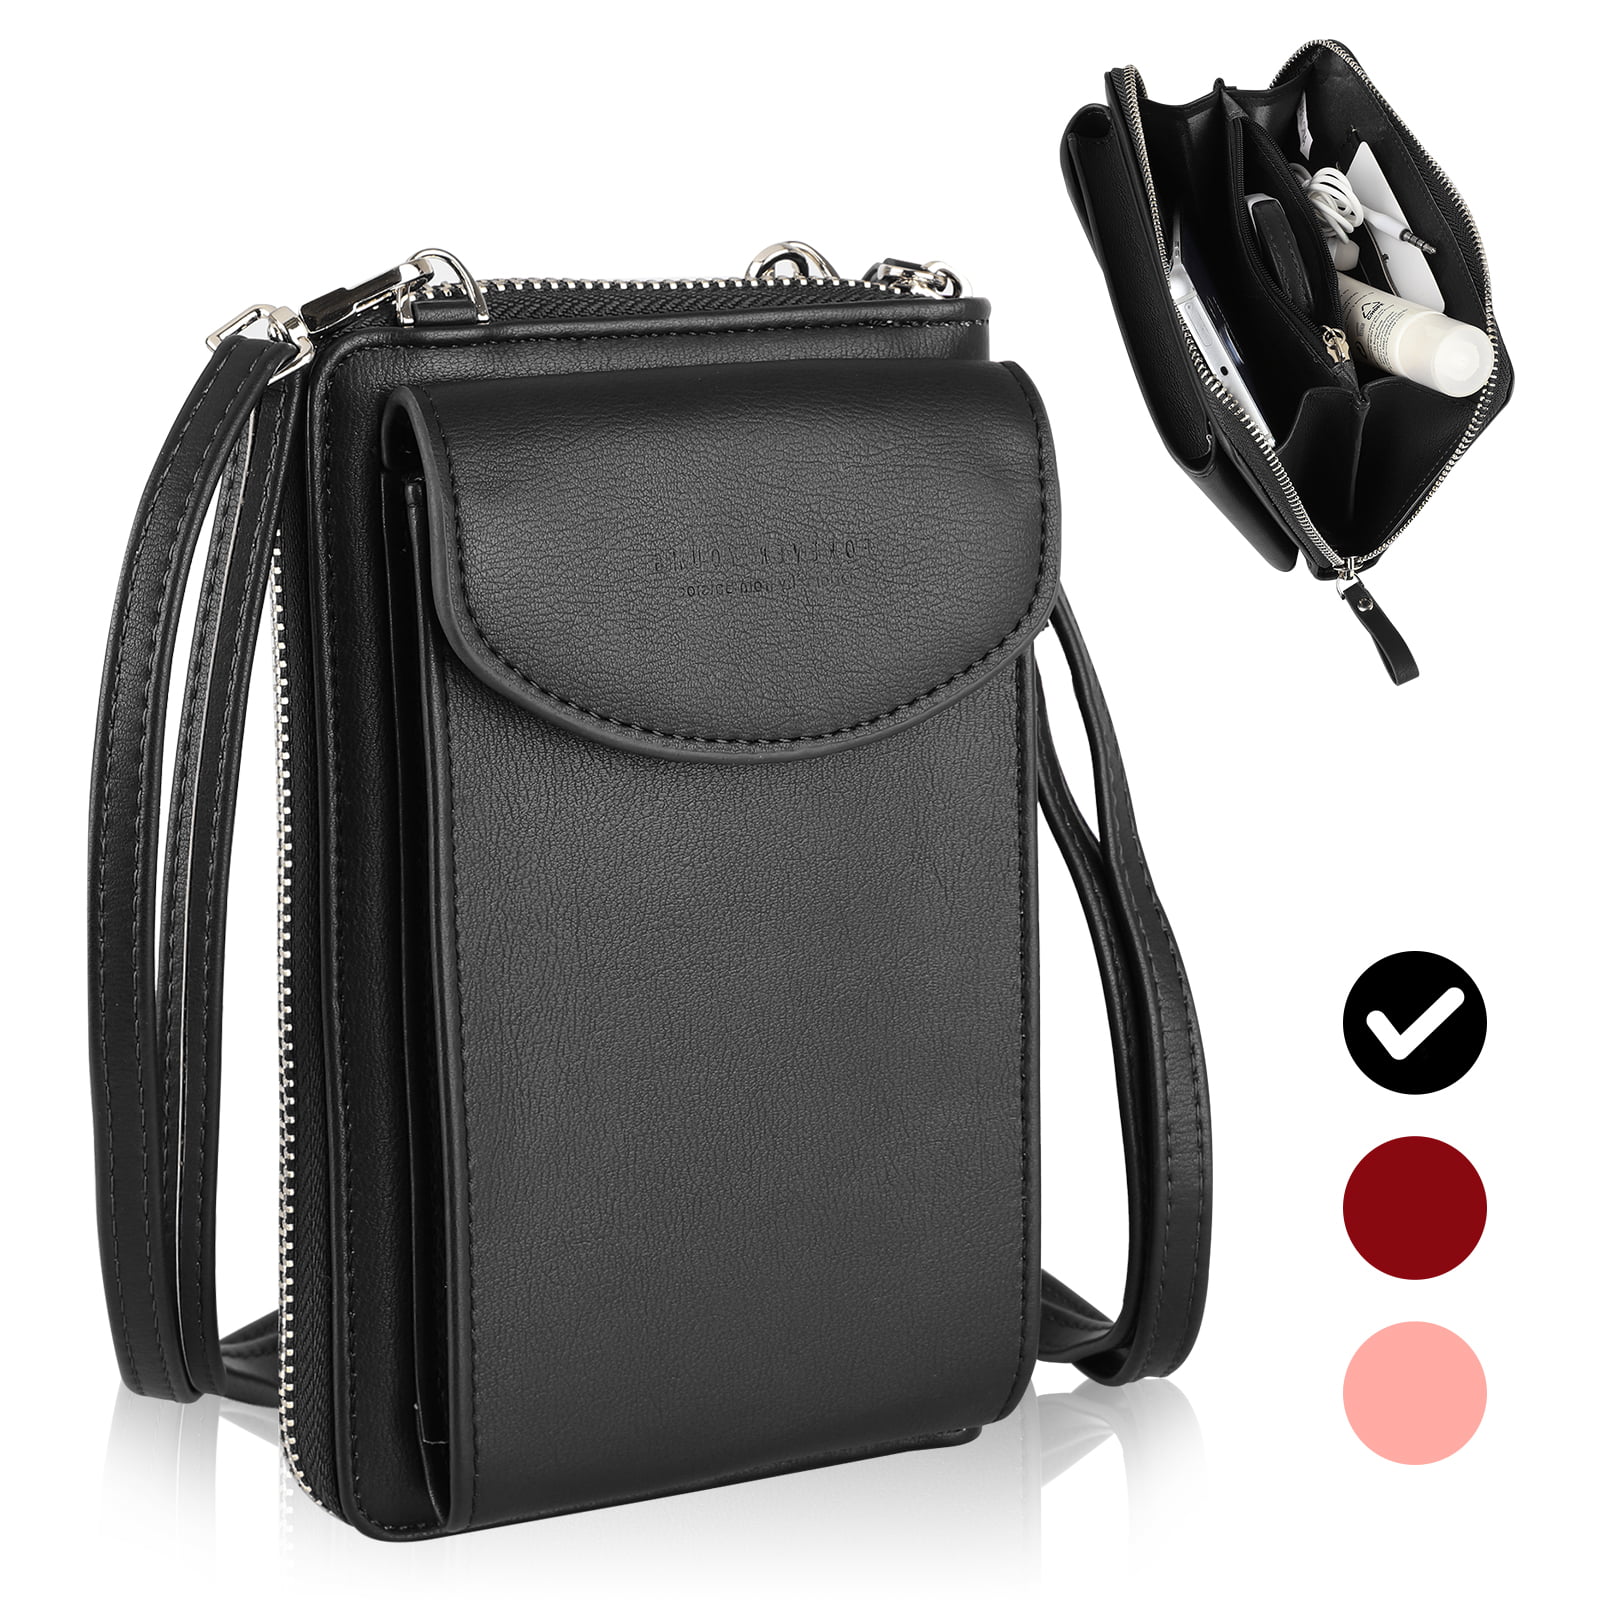 Crossbody Cell Phone Purse for Women Small Wallet Purse Shoulder Bag